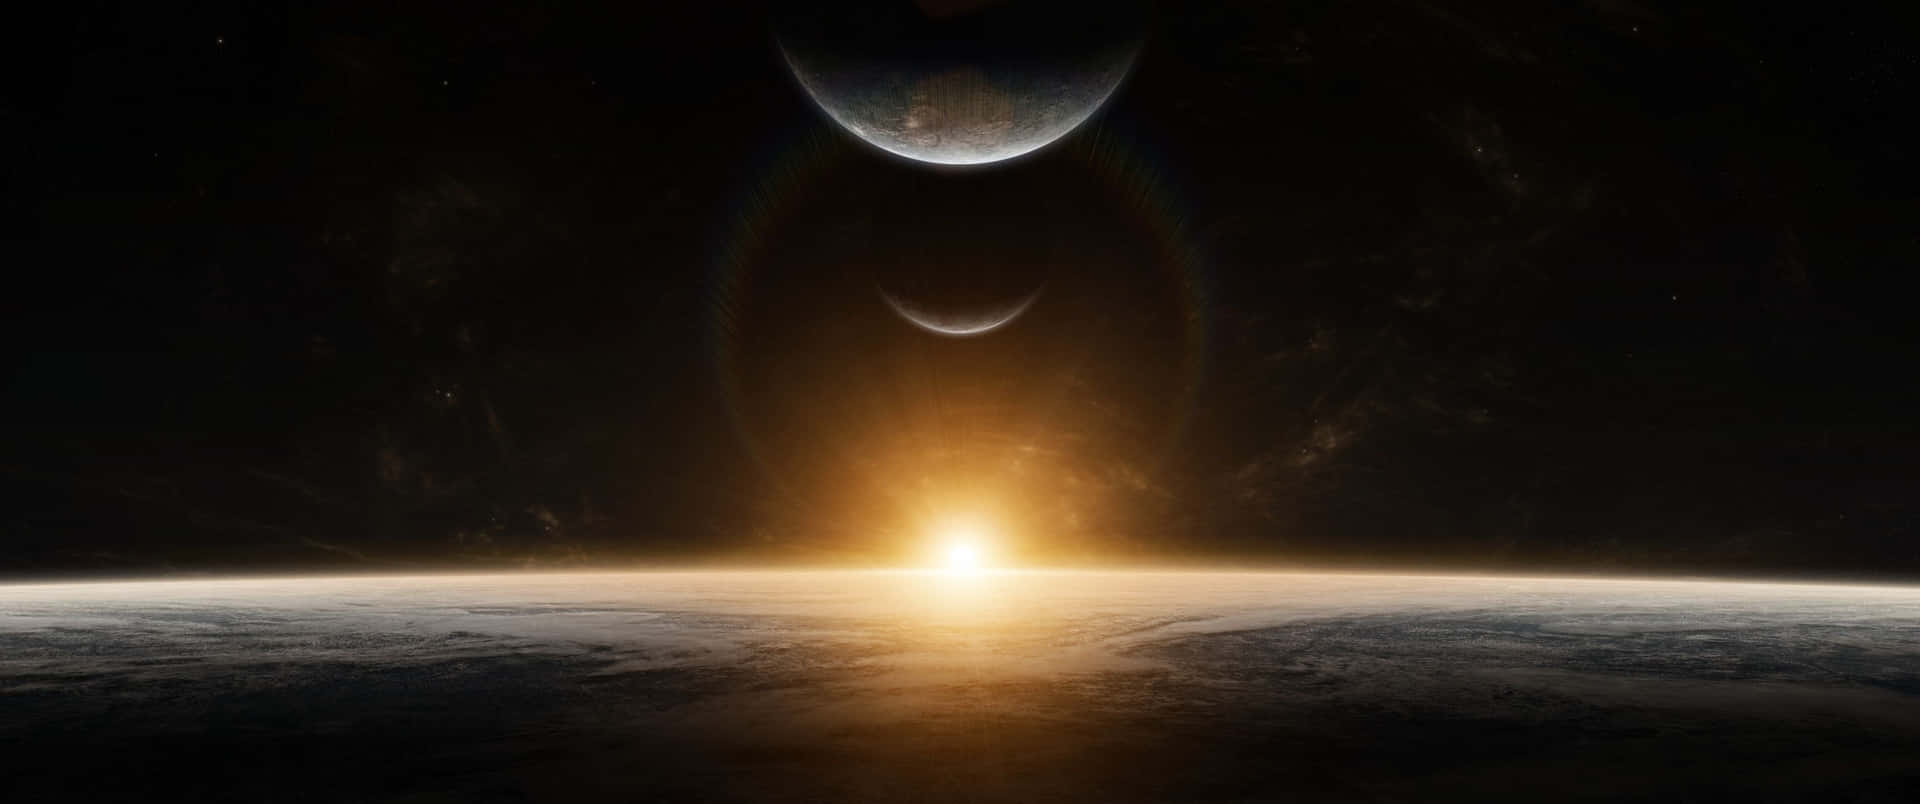 the sun rising over the earth and moon